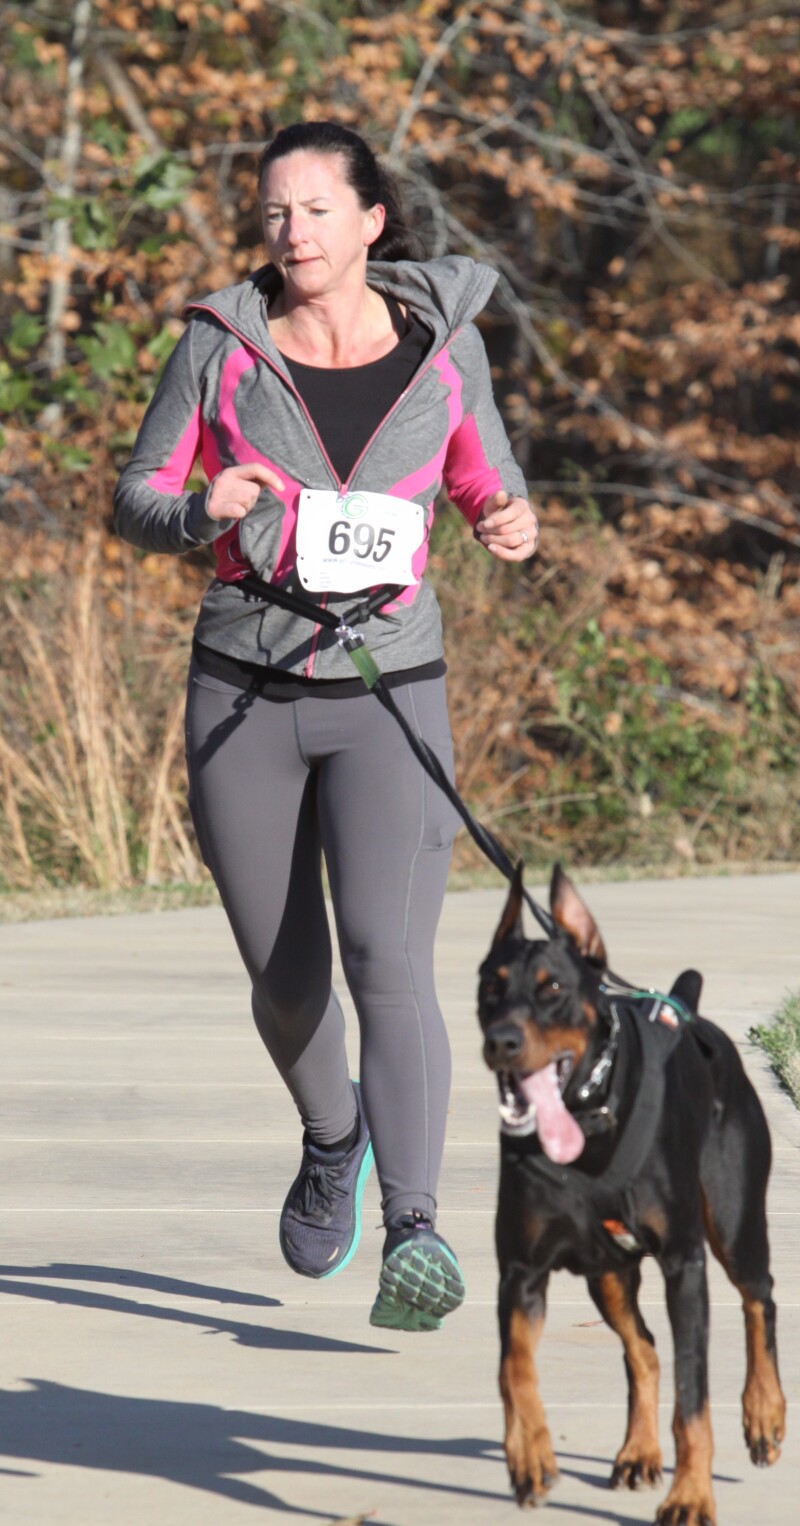 Nicole Hass runs with her dog at the Hounds at Hanna 5K race on Saturday, November 19th.  